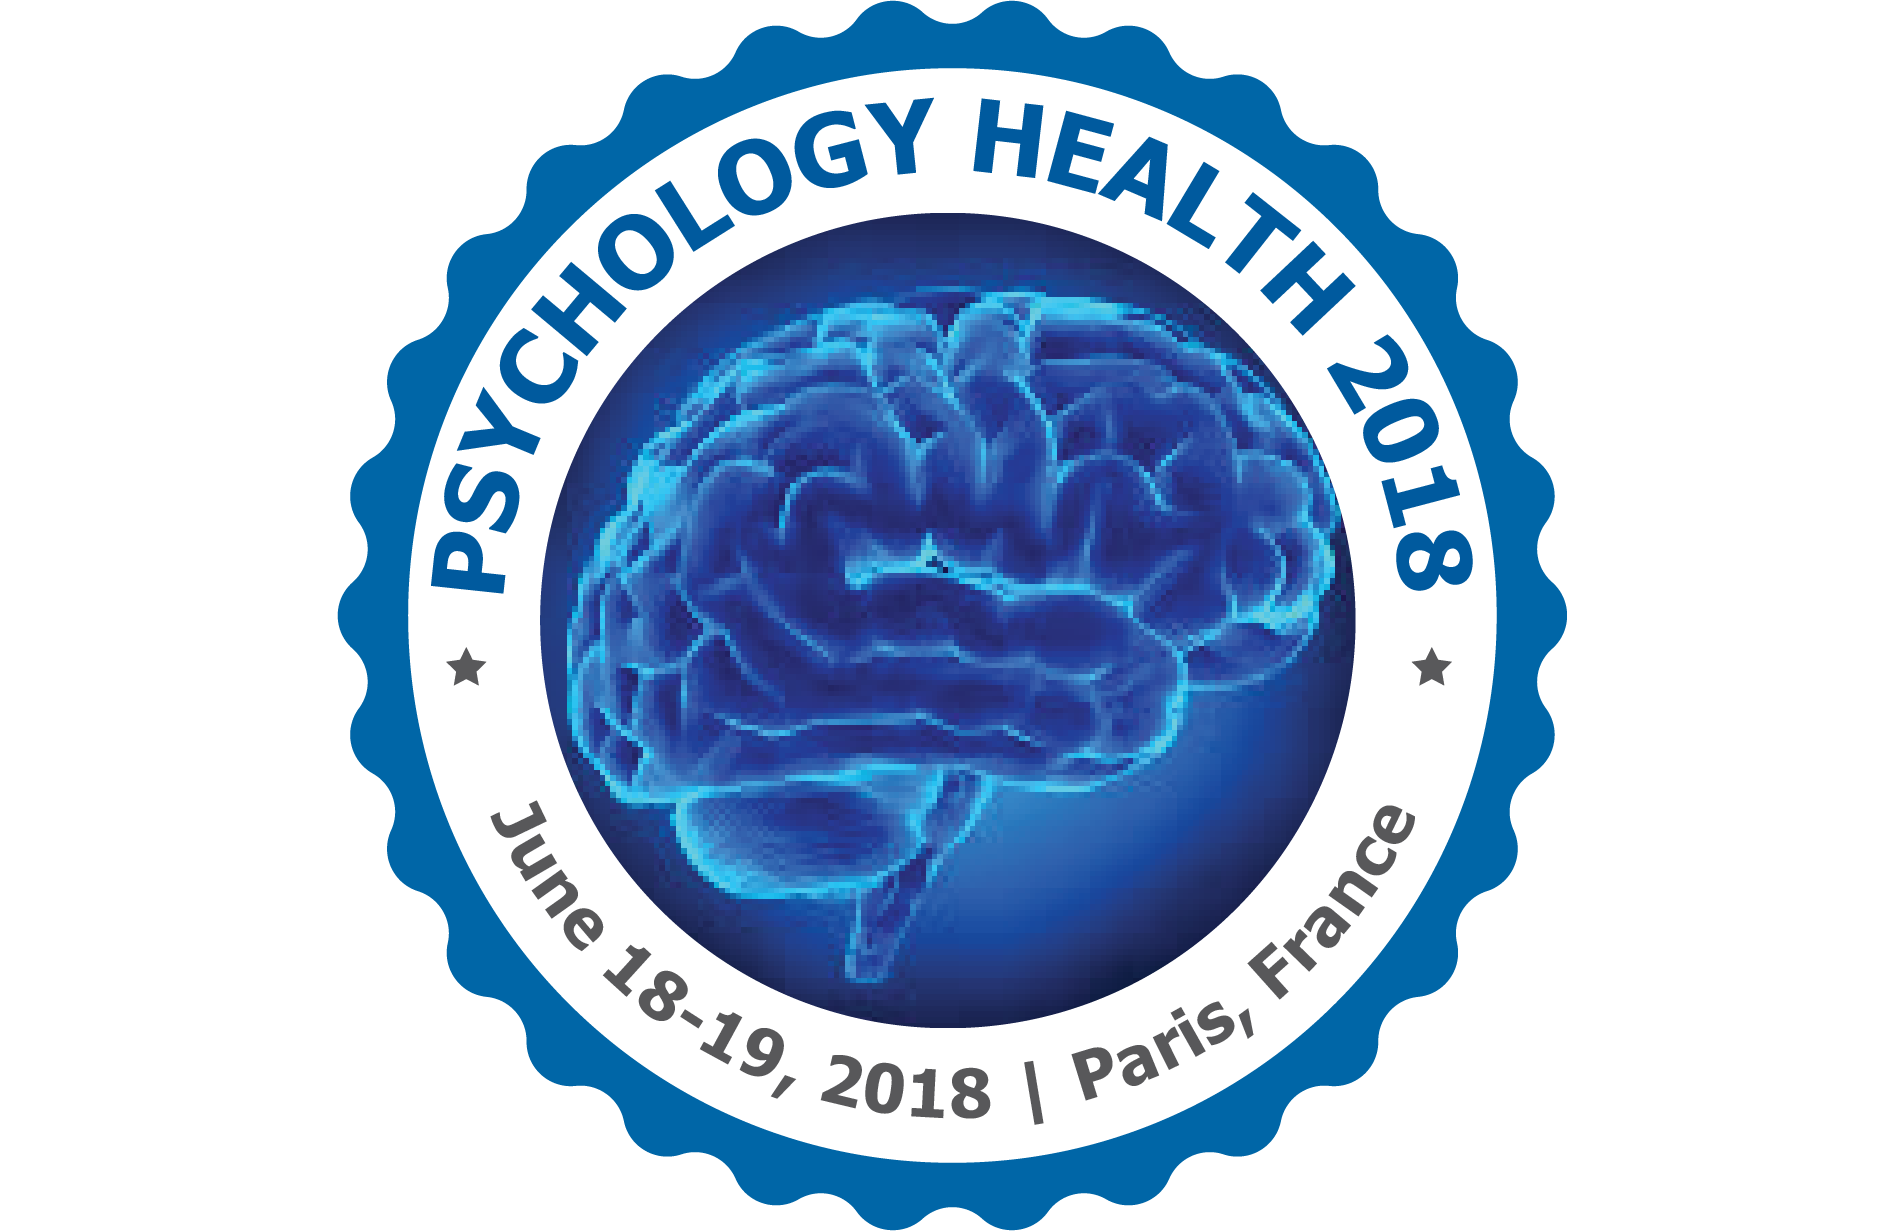 Photos of 27th International Conference on Psychiatry & Psychology Health